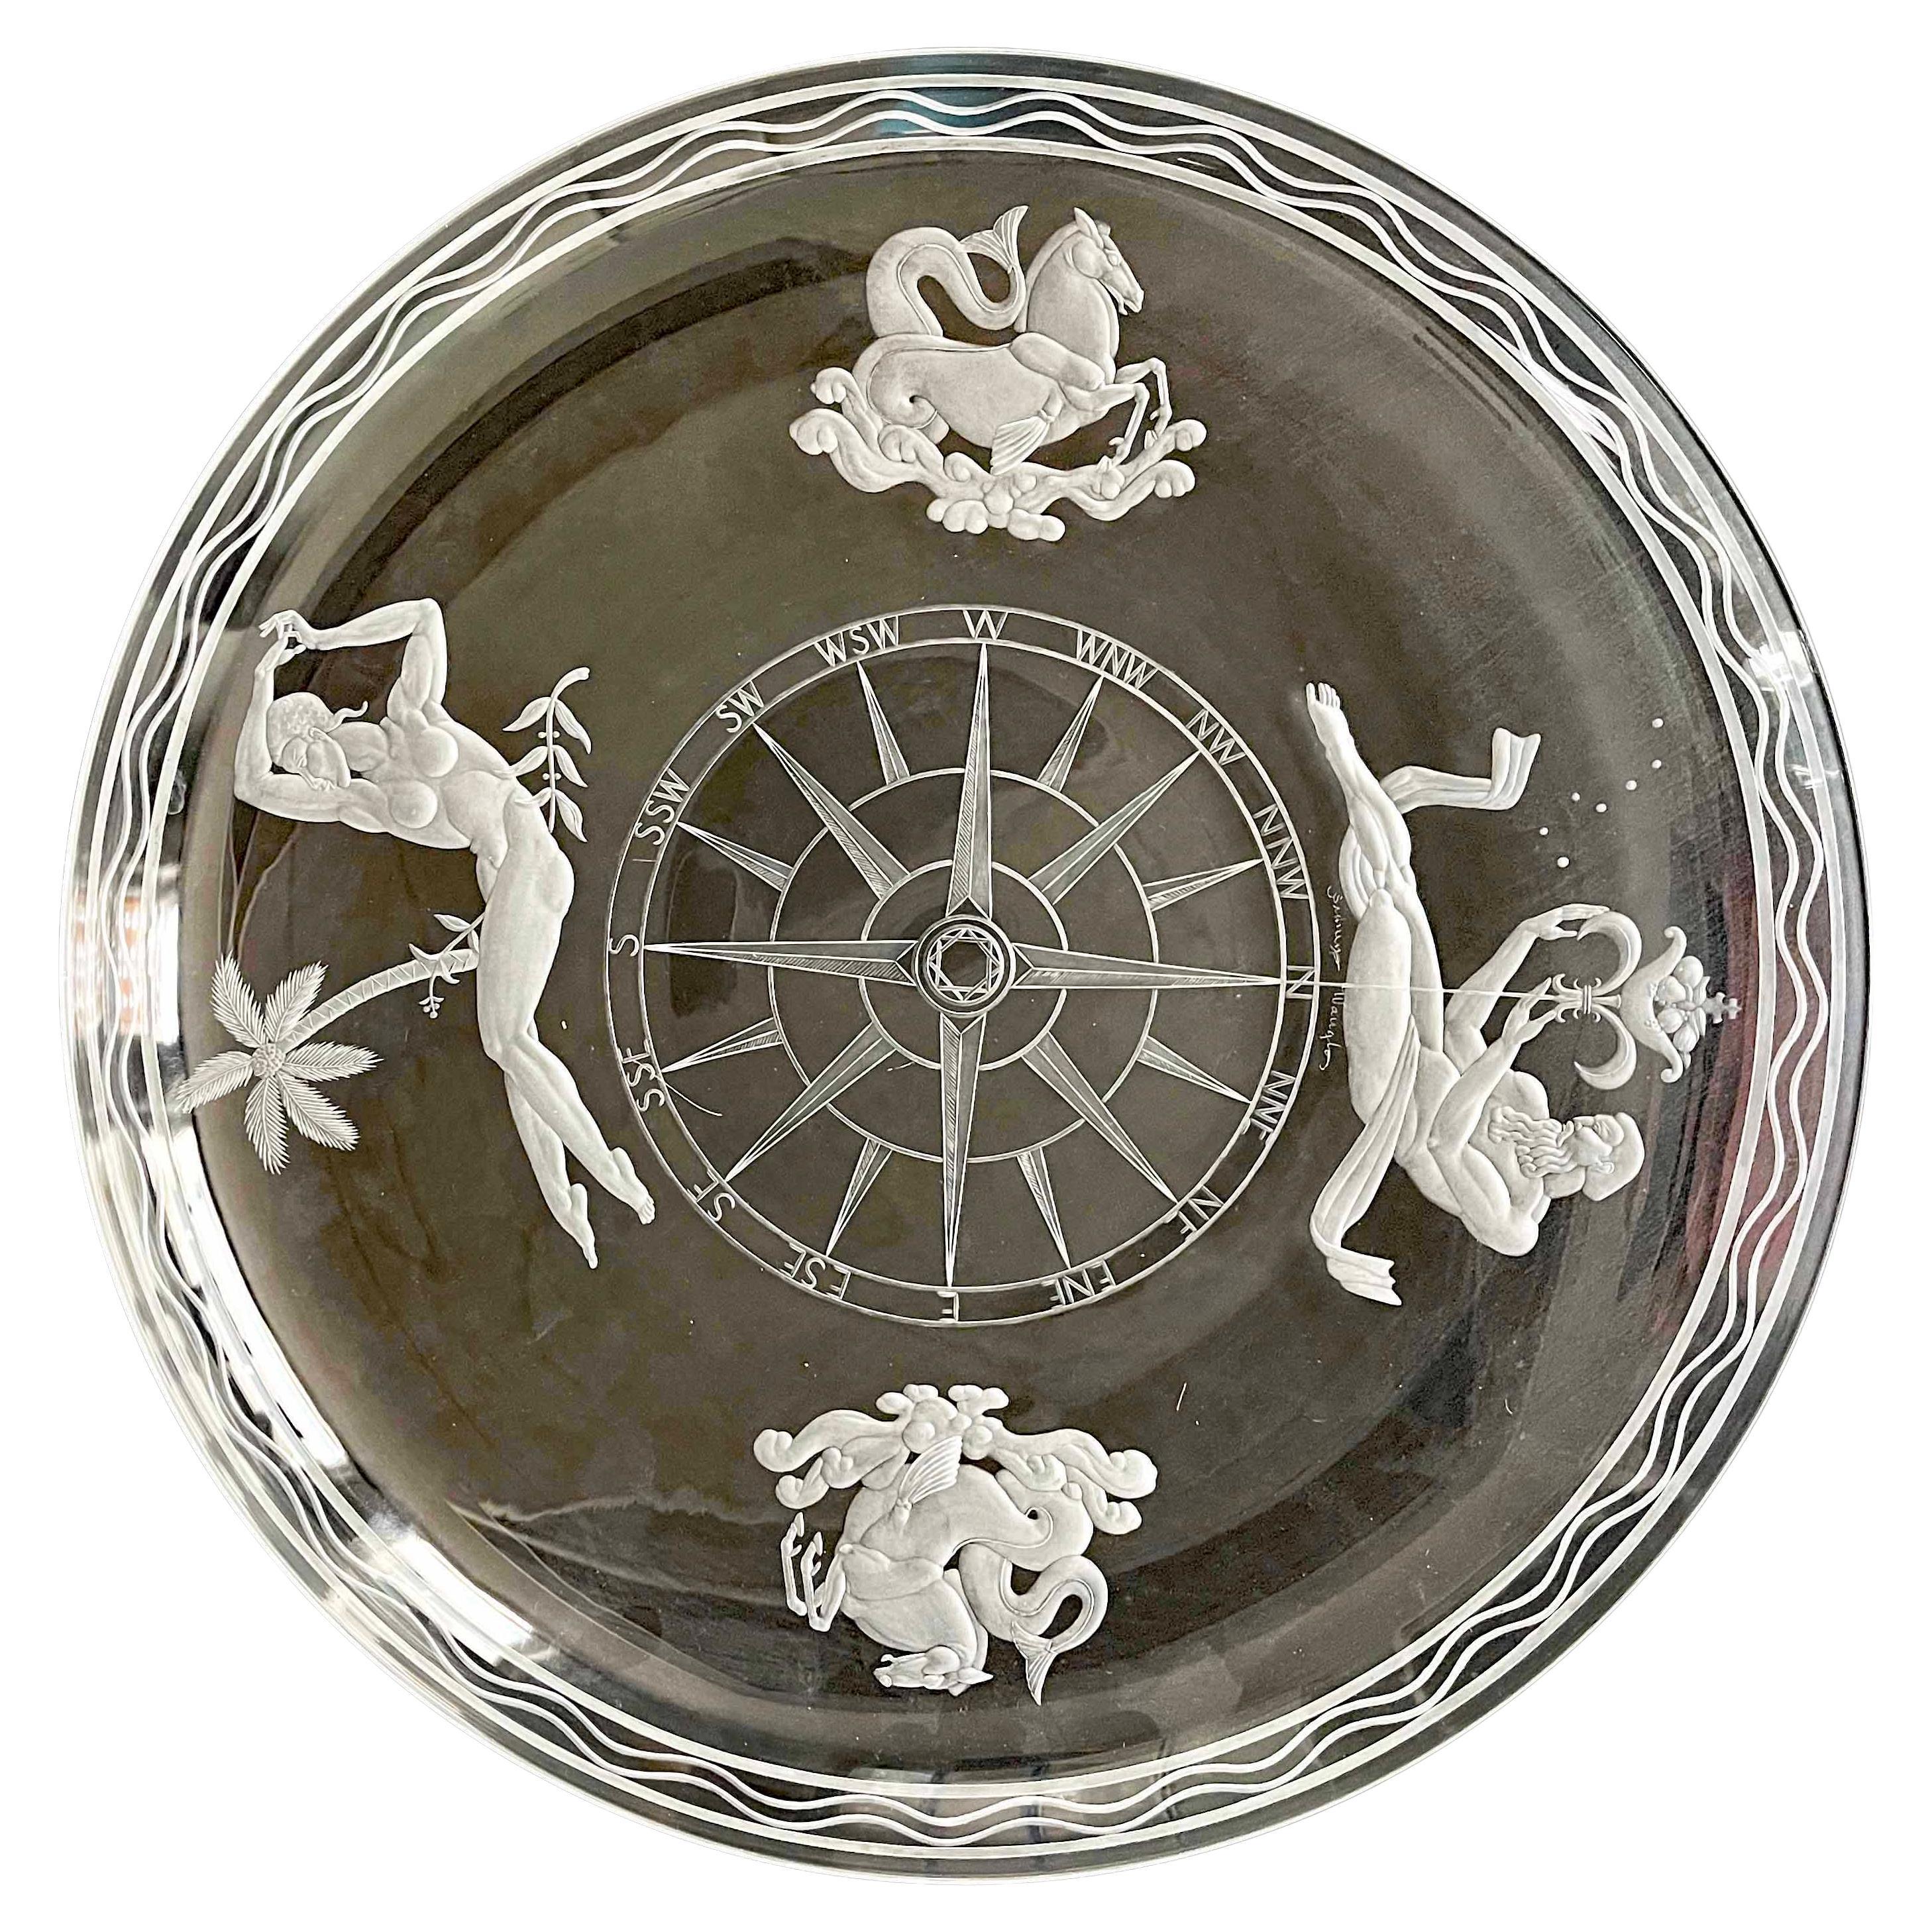 "Mariner's Bowl", Rare Art Deco Masterpiece w/ Neptune by Waugh for Steuben For Sale